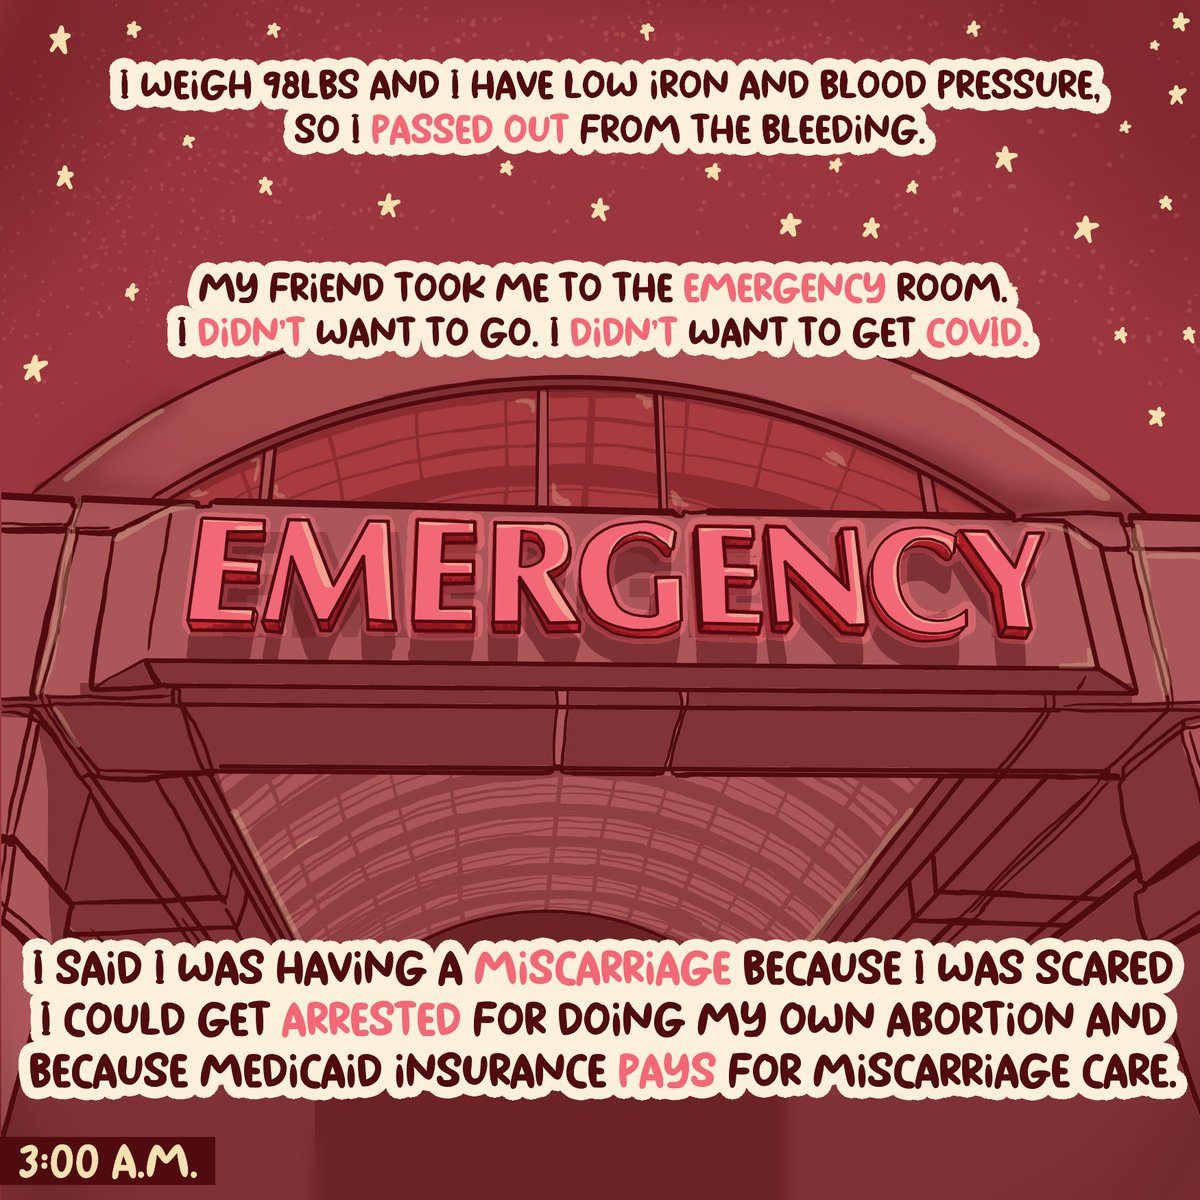 I weigh 98lbs & I have low iron & blood pressure, so I passed out from the bleeding. My friend took me to the emergency room. I said I was having a miscarriage because I was scared I could get arrested for doing my own abortion & Medicaid insurance pays for miscarriage care.